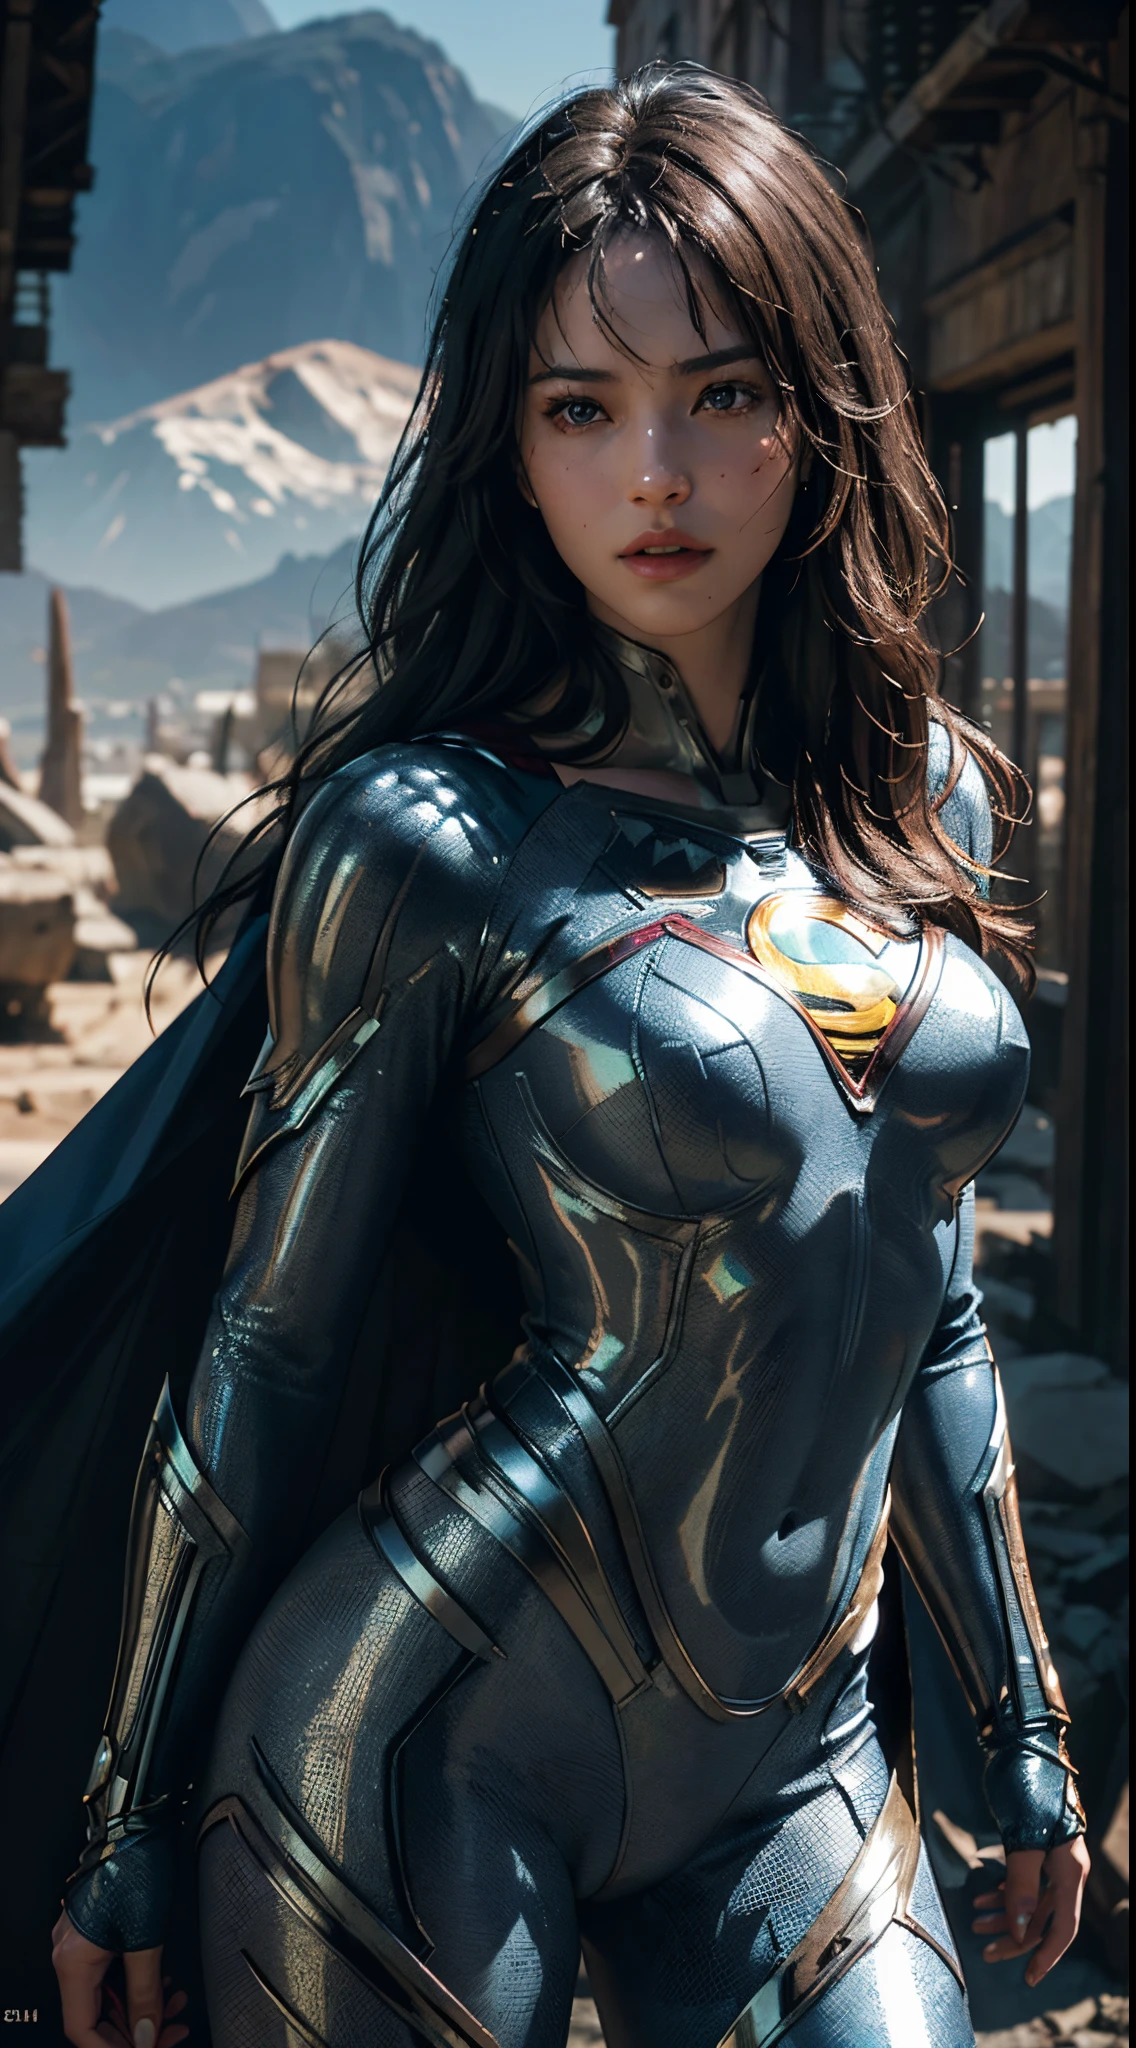 Superman from Man of Steel stands imposingly in an abandoned, haunted lost city.. Moonlight highlights your muscles and scars. The scenery is lush and mysterious, with dark city and surroundings. The camera details everything, warrior woman, in front of him.(Shiny and detailed skin:1.3), ((camel toe)), (Huge-breasts), (sexy clothes), ((sexypose, sexually dressed)), 8K, (skin texture:1.1), (Sweaty Body 1.1), (Skin Shine 1.1), (highly detail face:1.1), High detail of the body, very detailed clothes), (Realistic Ultra High Definition, 8K, extra high resolution, Film grain, Cinematic lighting, rim lighting, photo by Arnie Freytag